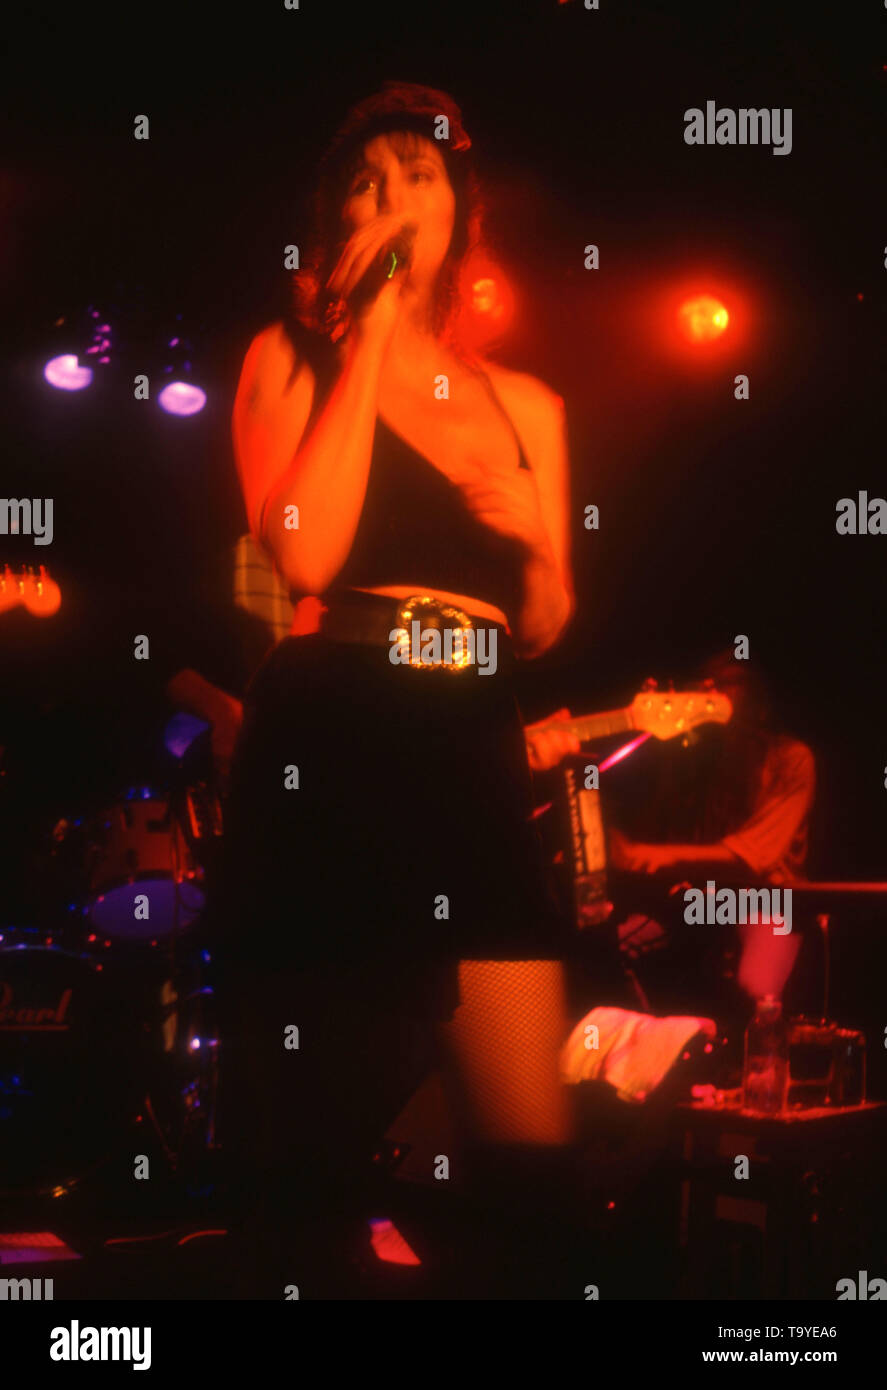 West Hollywood, California, USA 23rd April 1994 Singer Cher performs in concert on April 23, 1994 at The Viper Room in West Hollywood, California, USA. Photo by Barry King/Alamy Stock Photo Stock Photo